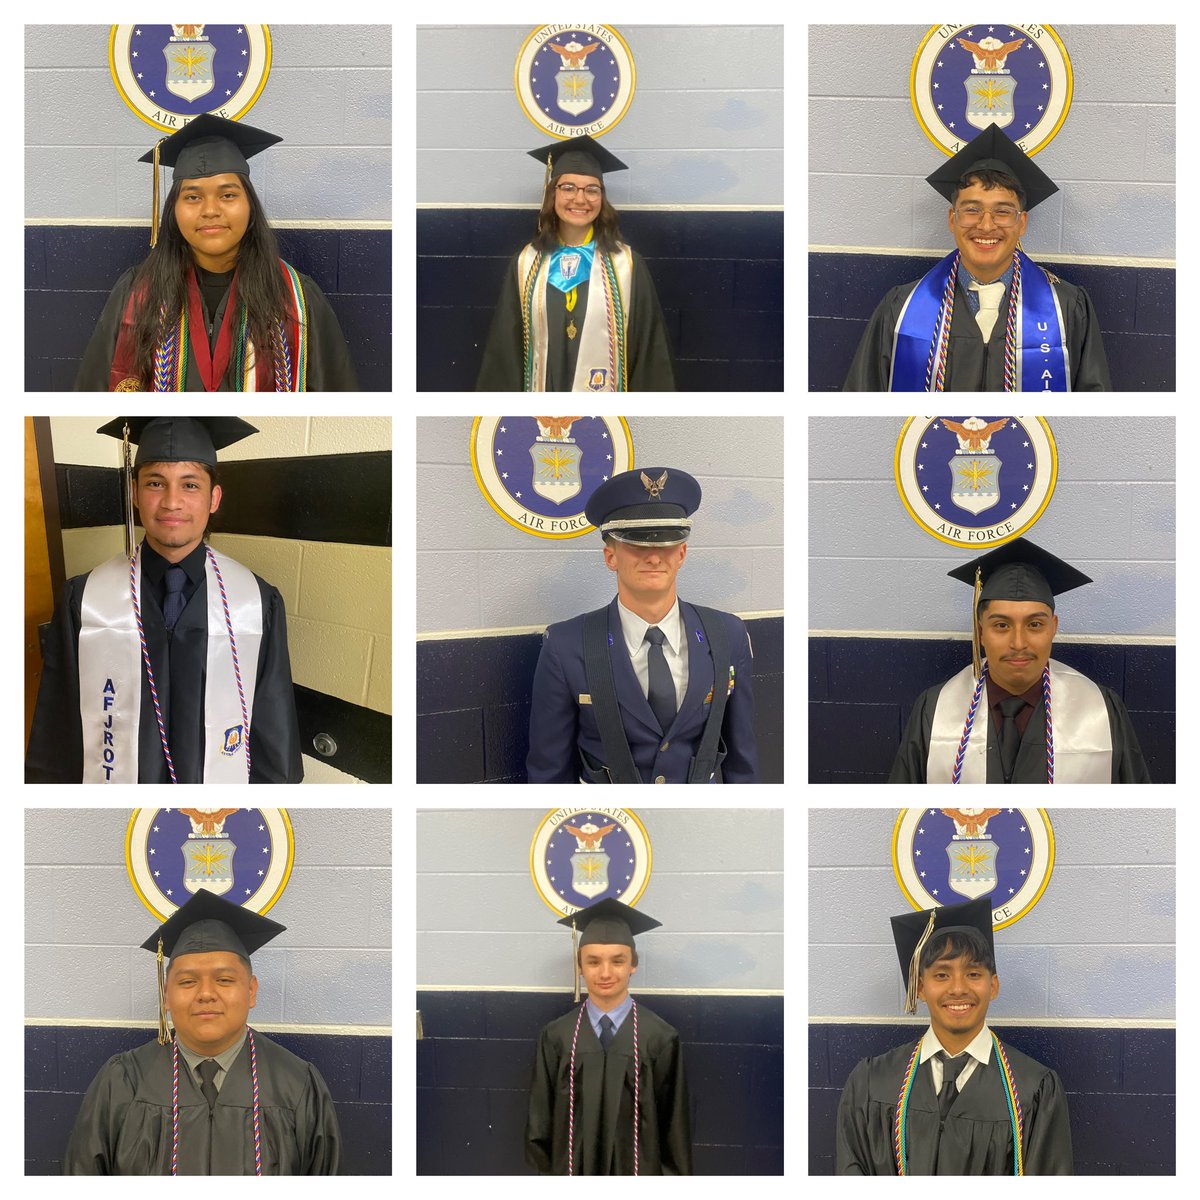 Thank you to our SHS AFJROTC graduates for choosing to be part of our JROTC FAMILY. You touched all of our lives and left a legacy of EXCELLENCE! You will always have a home in TN-20021! #RobCoAFJROTC #WeAreRCSTN